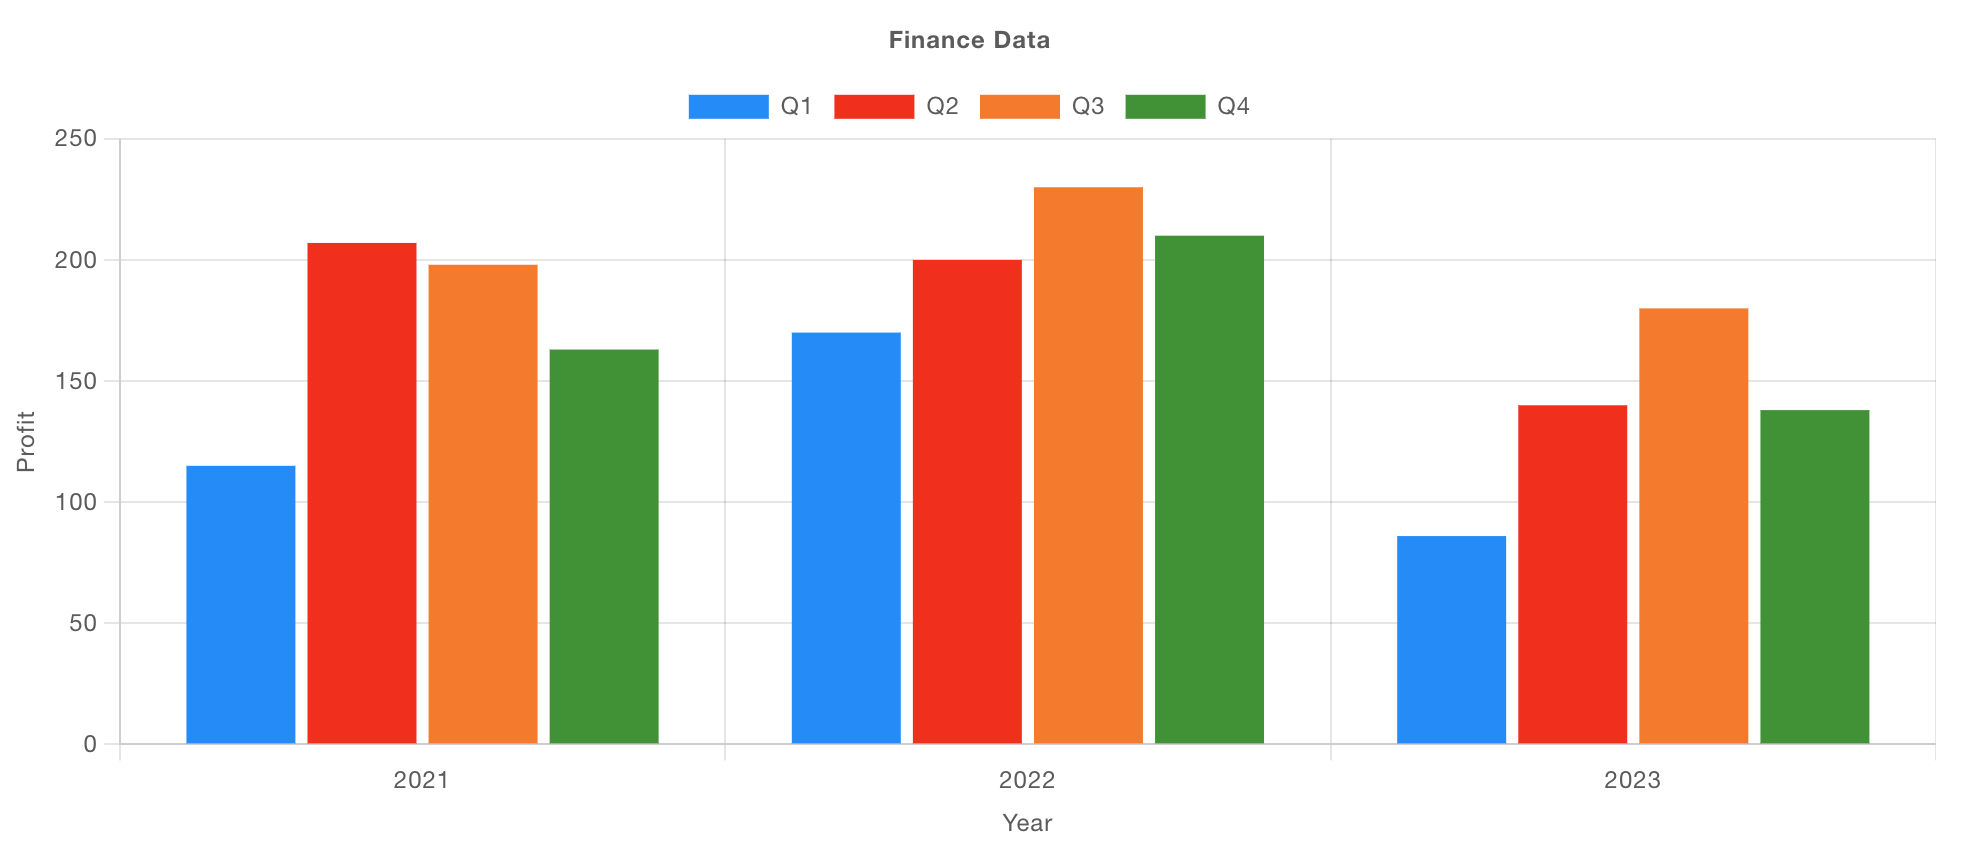 Example of a bar chart showing financial data, grouped by year